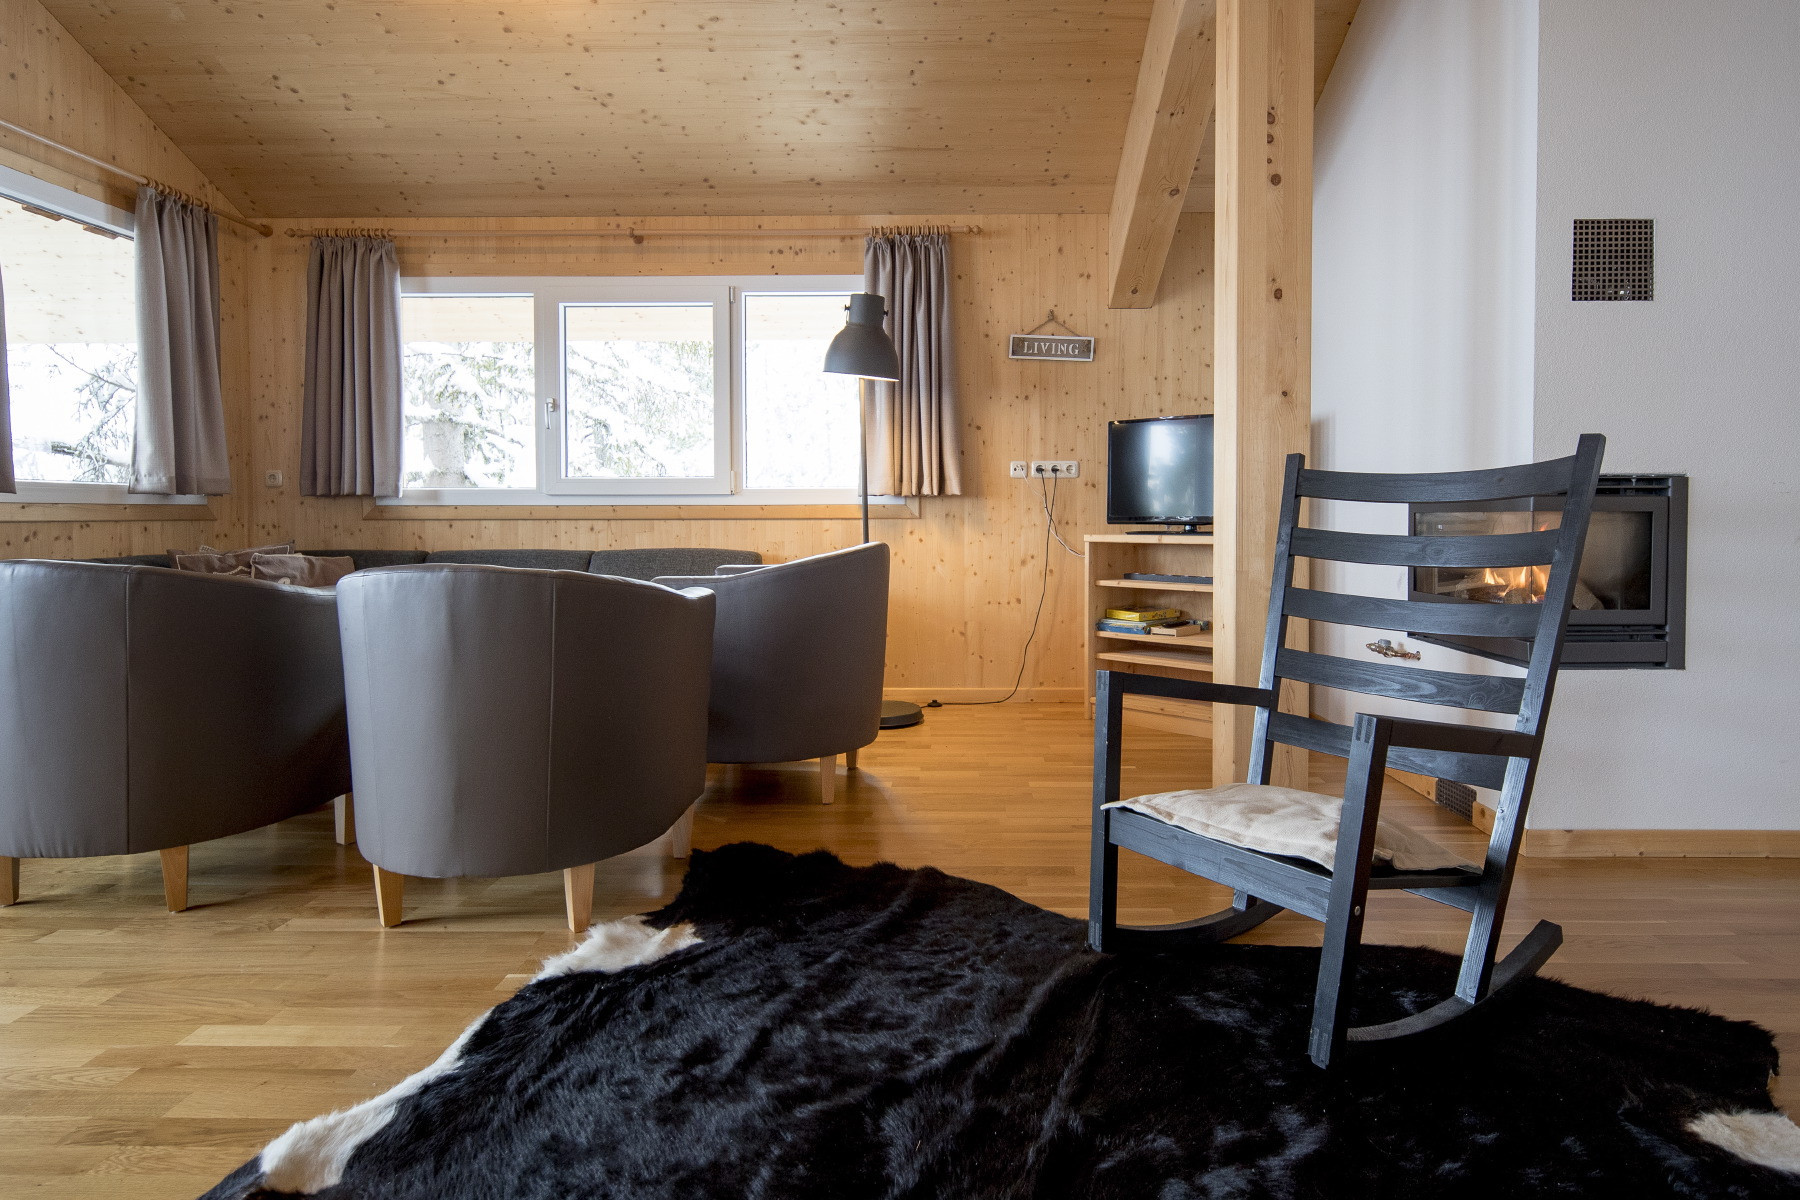  in Turrach - Chalet # 46 with IR-sauna and indoor whirlpool